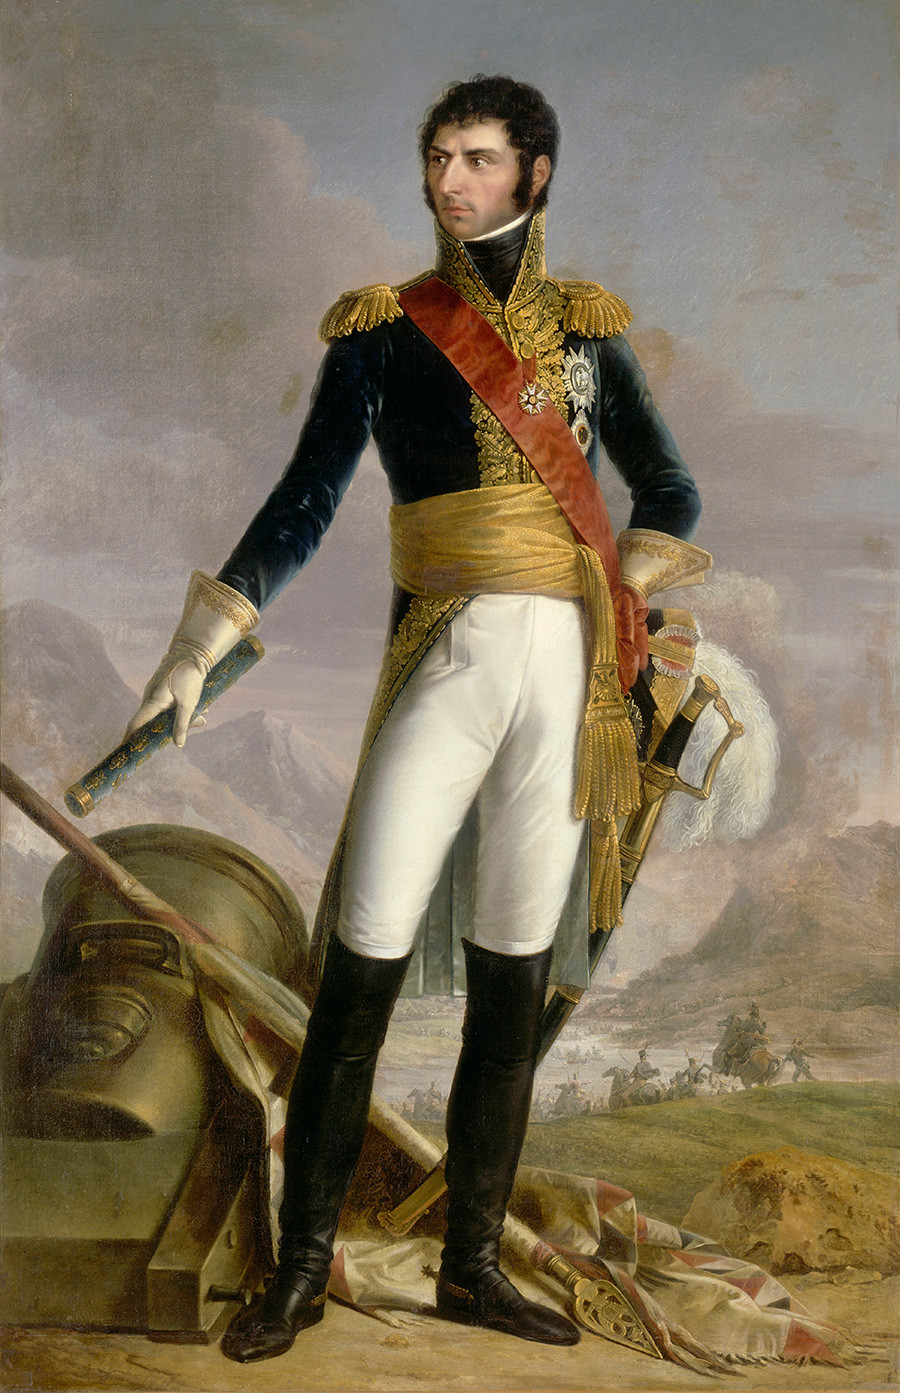 Jean Baptiste Bernadotte, Marshal of France, King of Sweden and Norway, 1818 after a painting by Francois Joseph Kinson